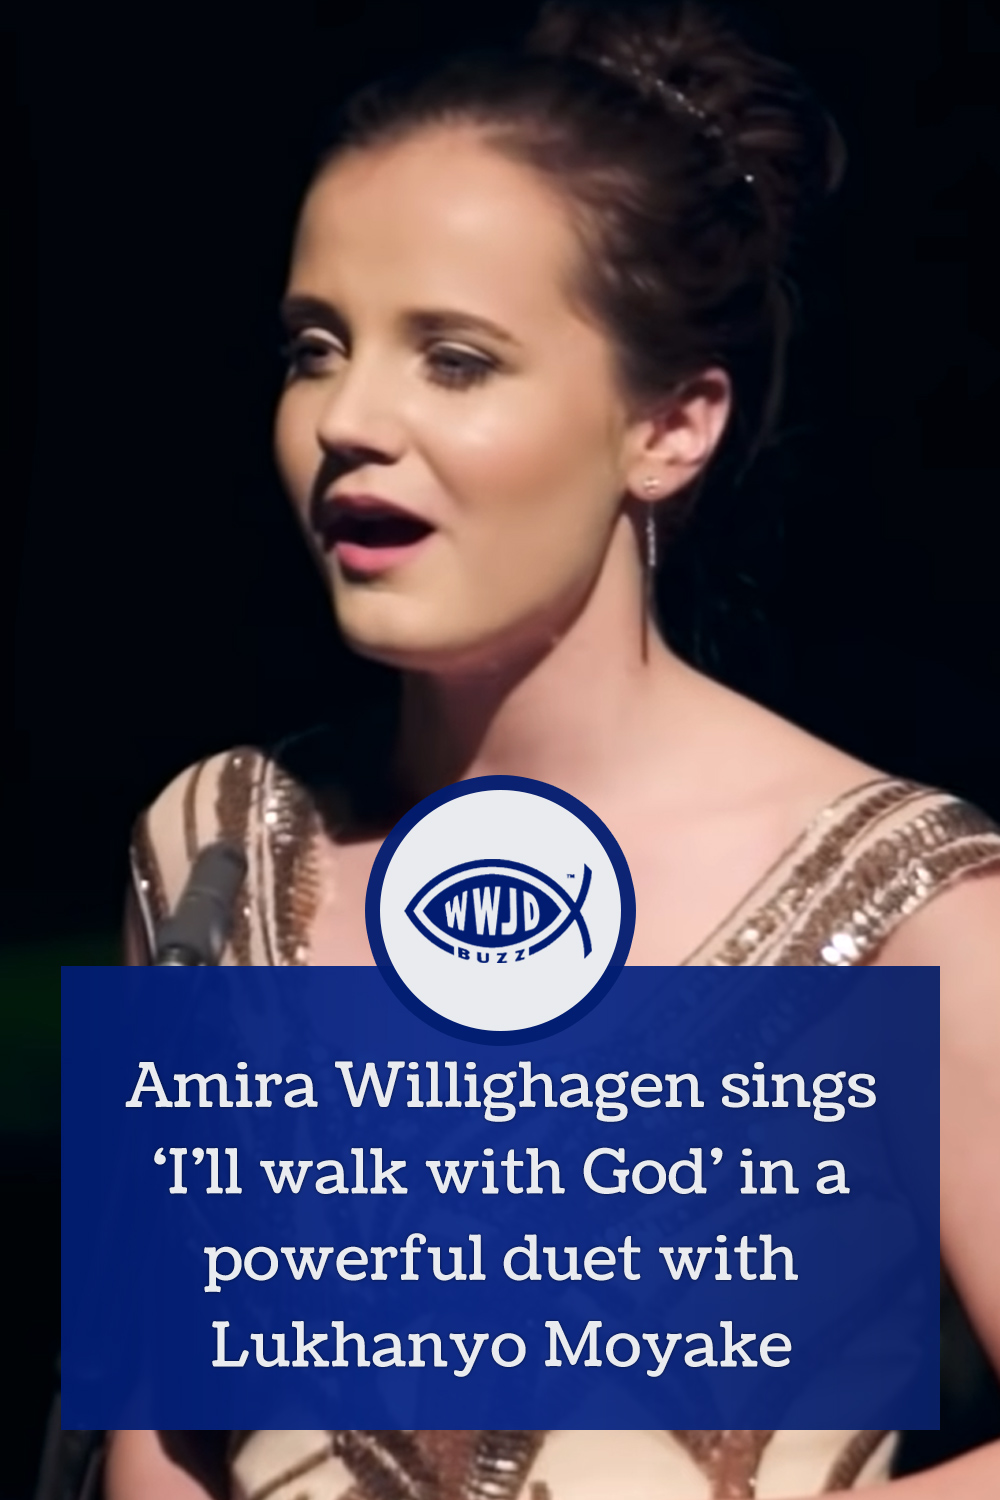 Amira Willighagen sings ‘I’ll walk with God’ in a powerful duet with Lukhanyo Moyake